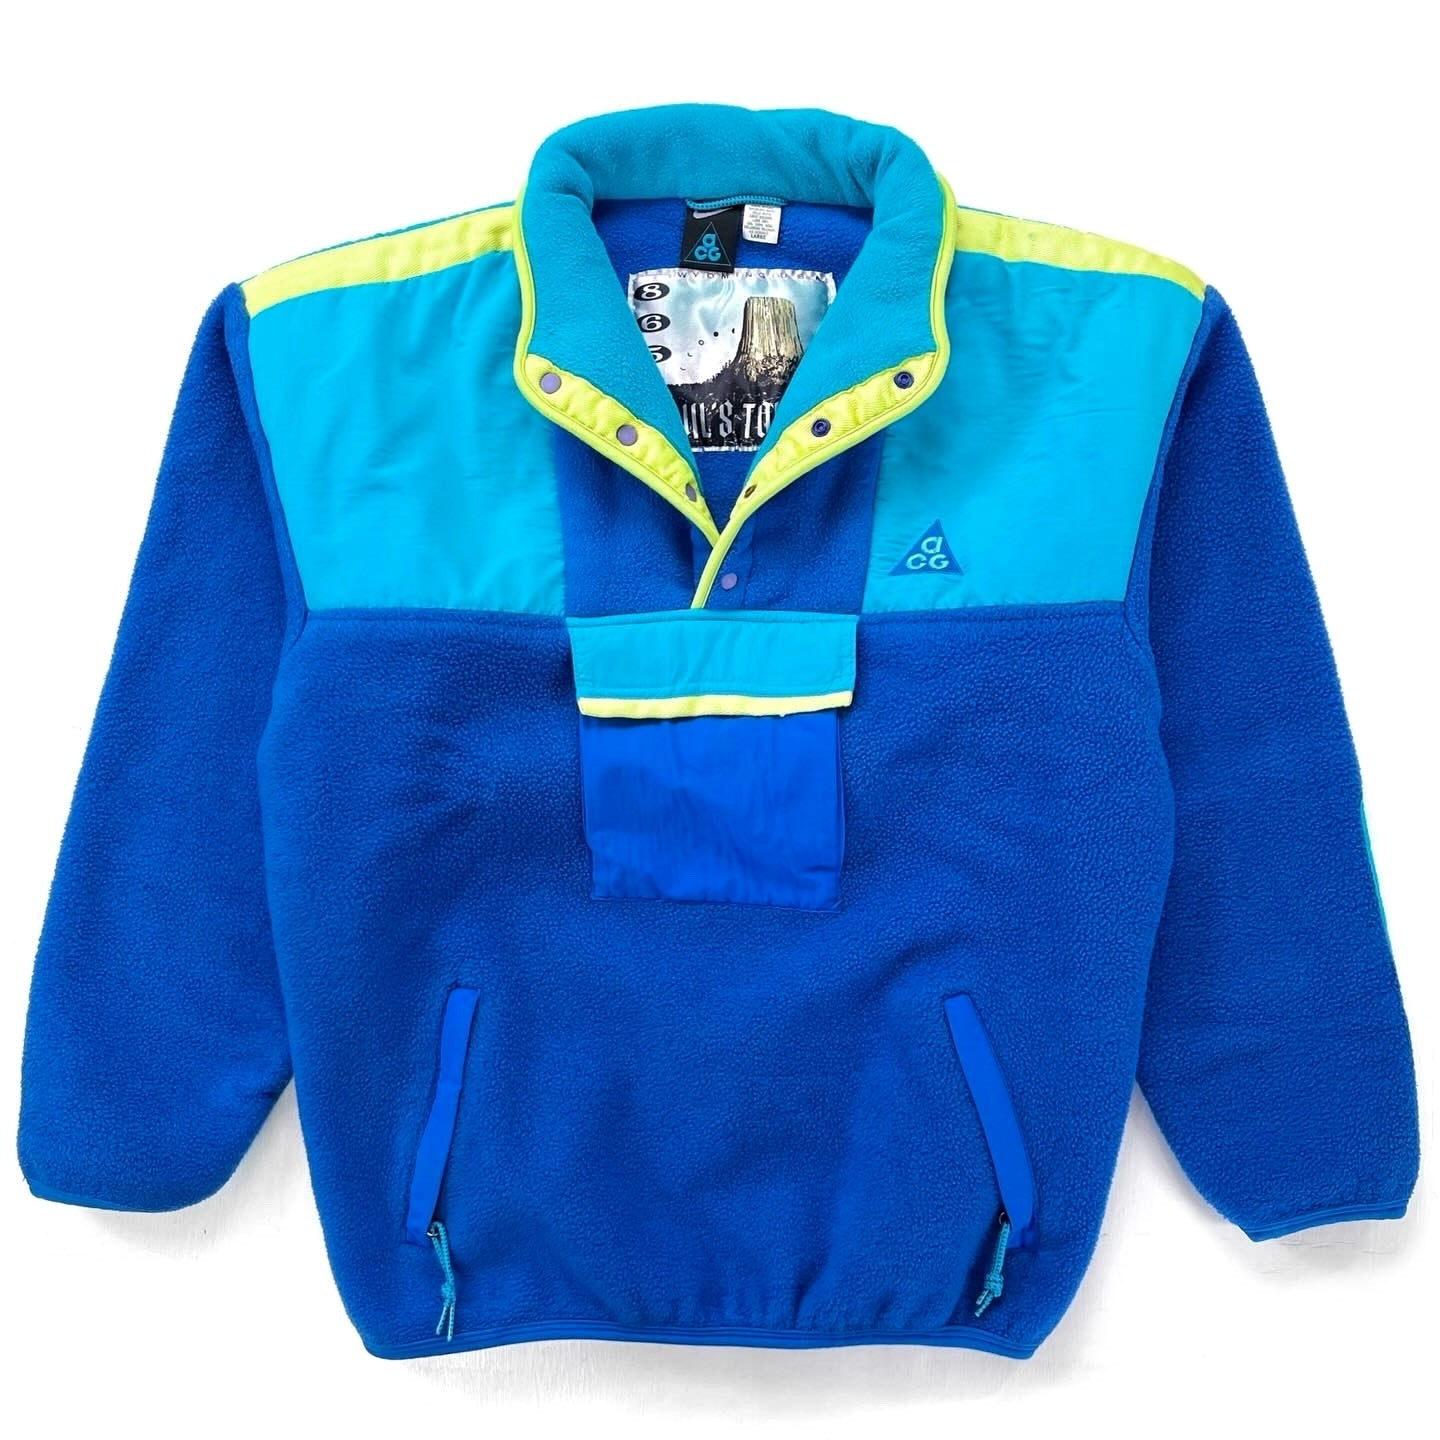 1990s Nike ACG Devils Tower Fleece Pullover, Electric Blue (L)